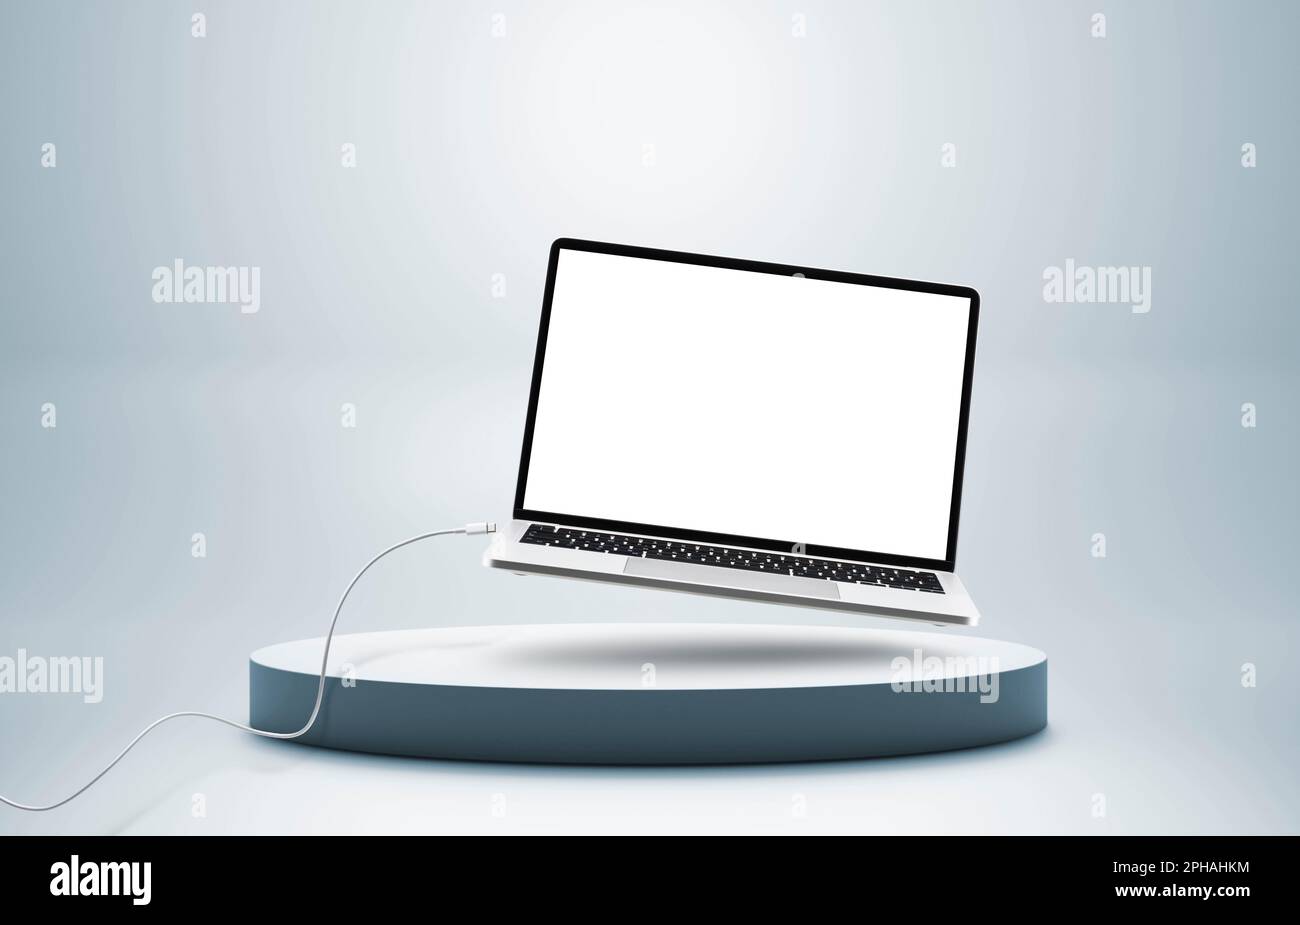 Laptop with cable floating on colored pedestal and blue background, Stock Photo